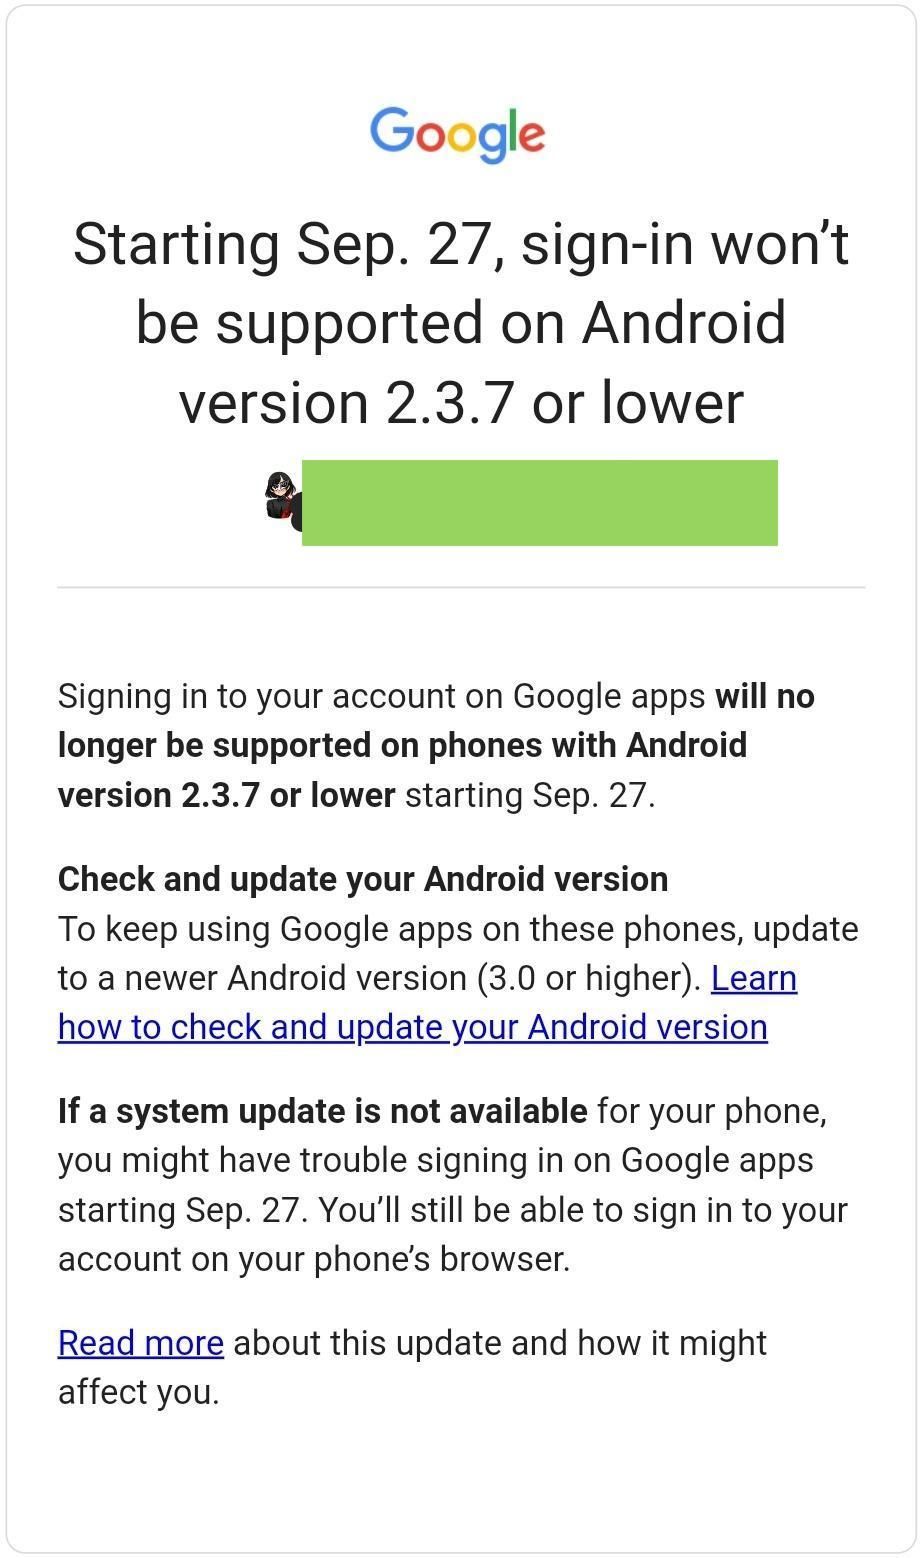 Google-sign-in-old-Android